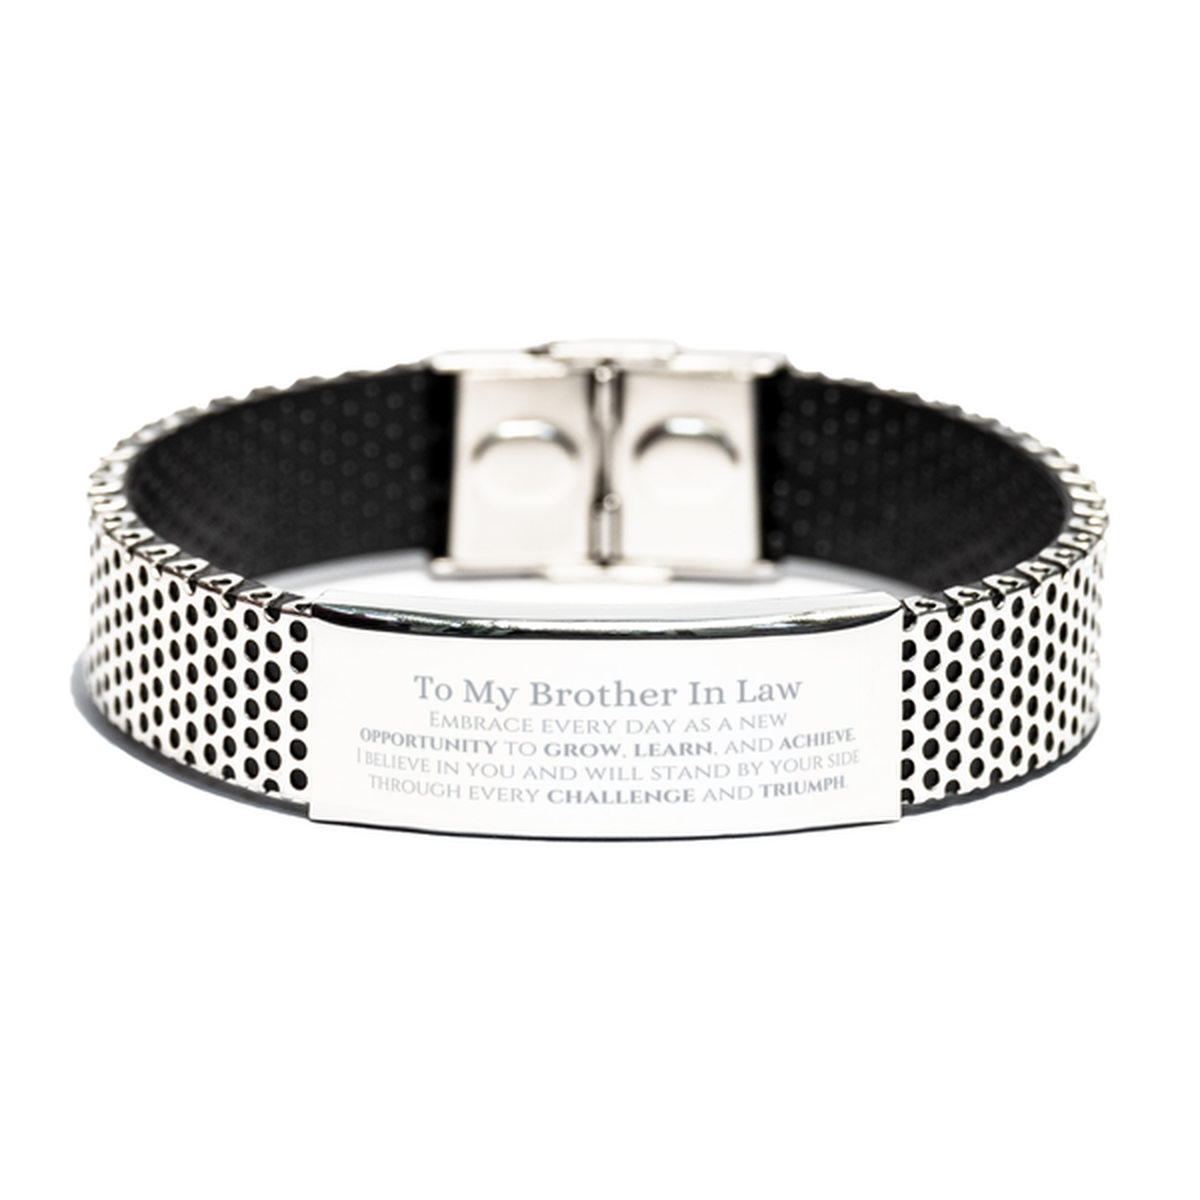 To My Brother In Law Gifts, I believe in you and will stand by your side, Inspirational Stainless Steel Bracelet For Brother In Law, Birthday Christmas Motivational Brother In Law Gifts